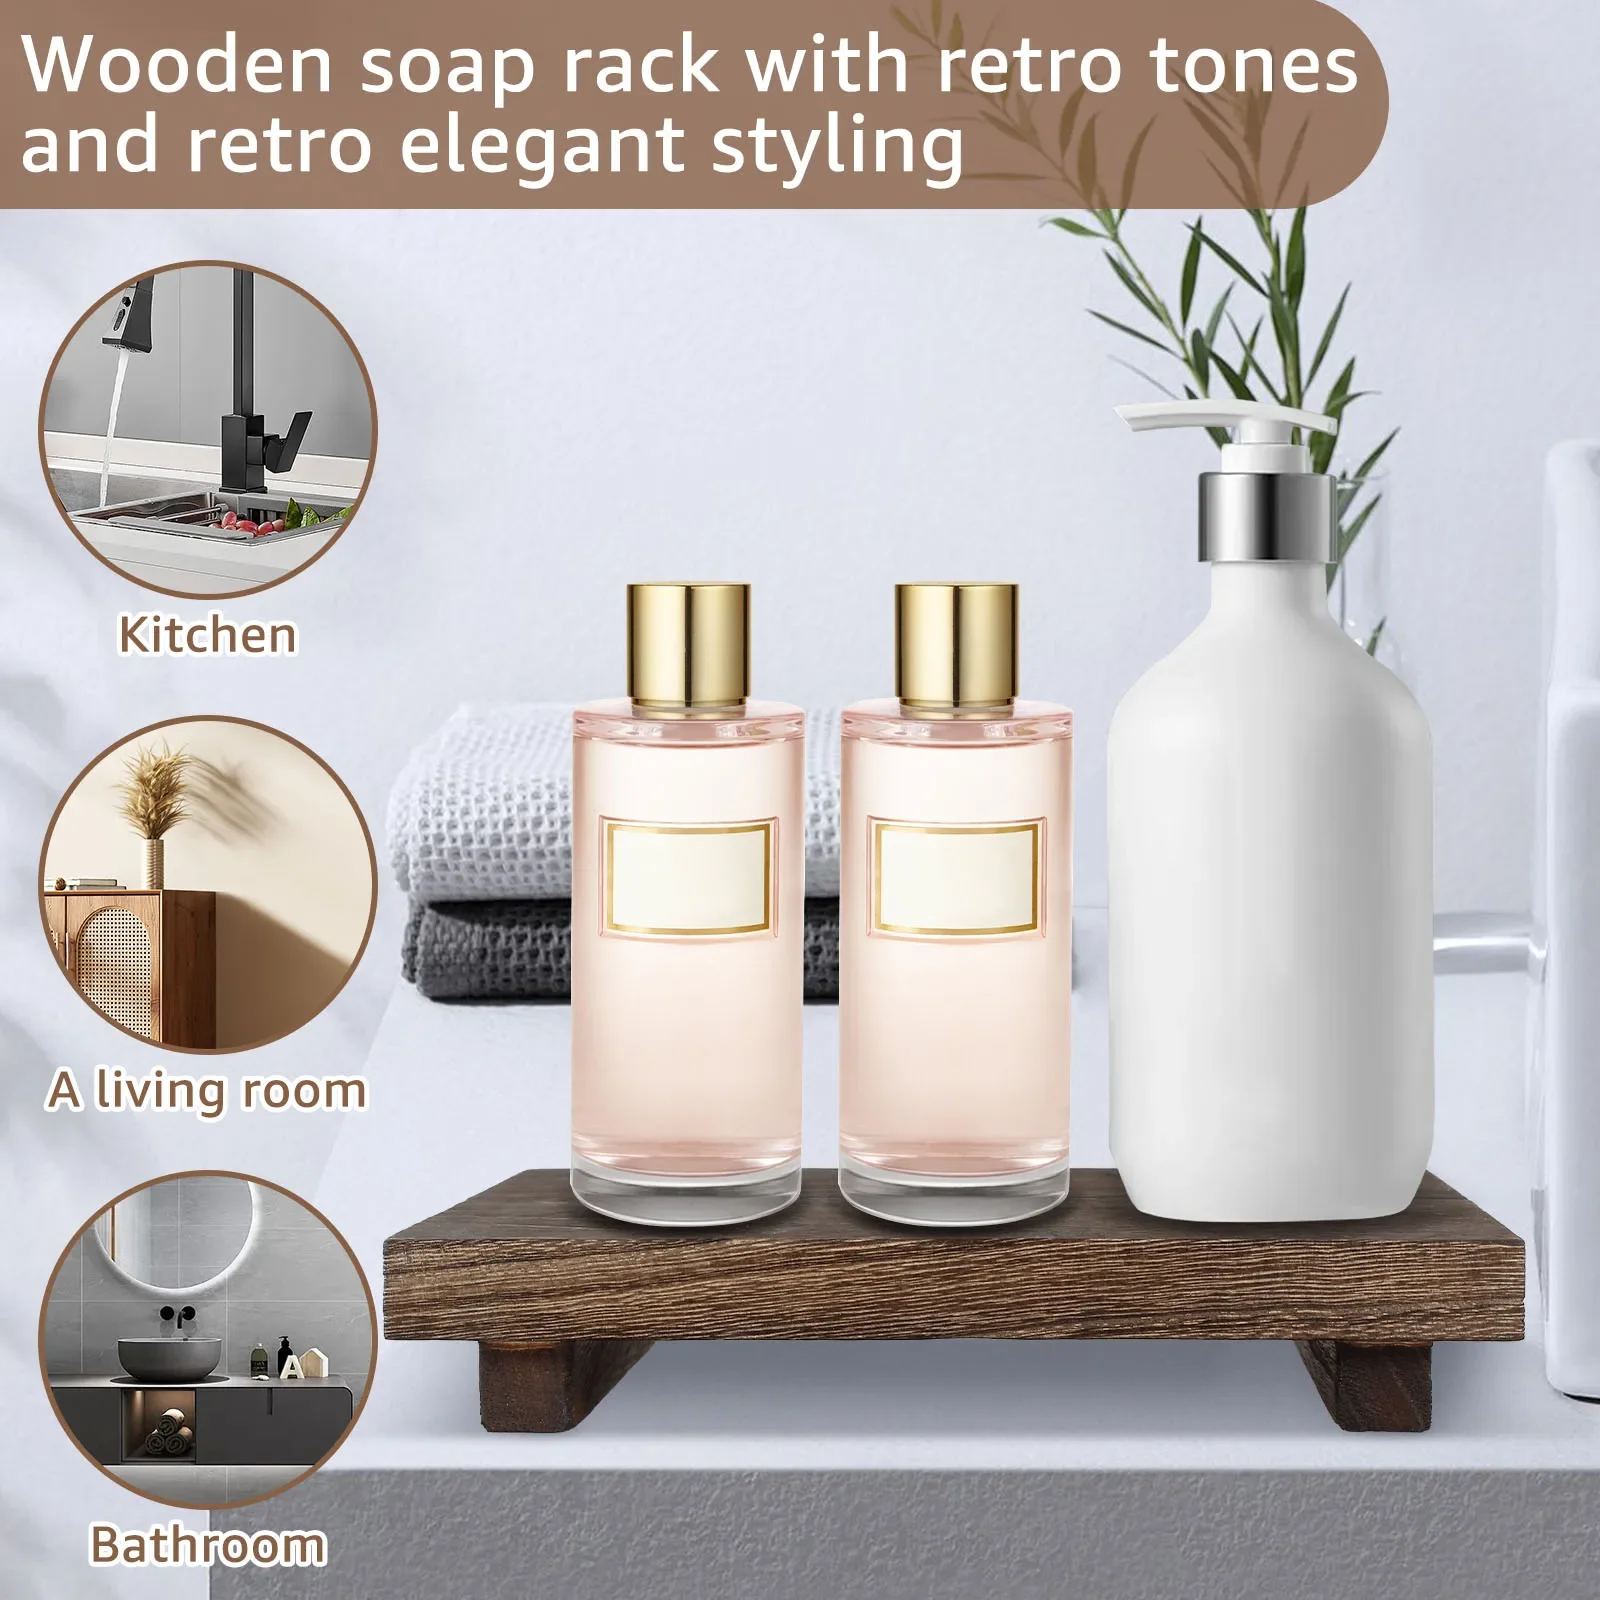 https://ae01.alicdn.com/kf/Se821d92c2735453ba070a221f95b920eY/Wood-Pedestal-Stand-Anti-Slip-Risers-Soap-Tray-Vintage-for-Table-Countertop-Candle-Sink-Kitchen-Bathroom.jpg